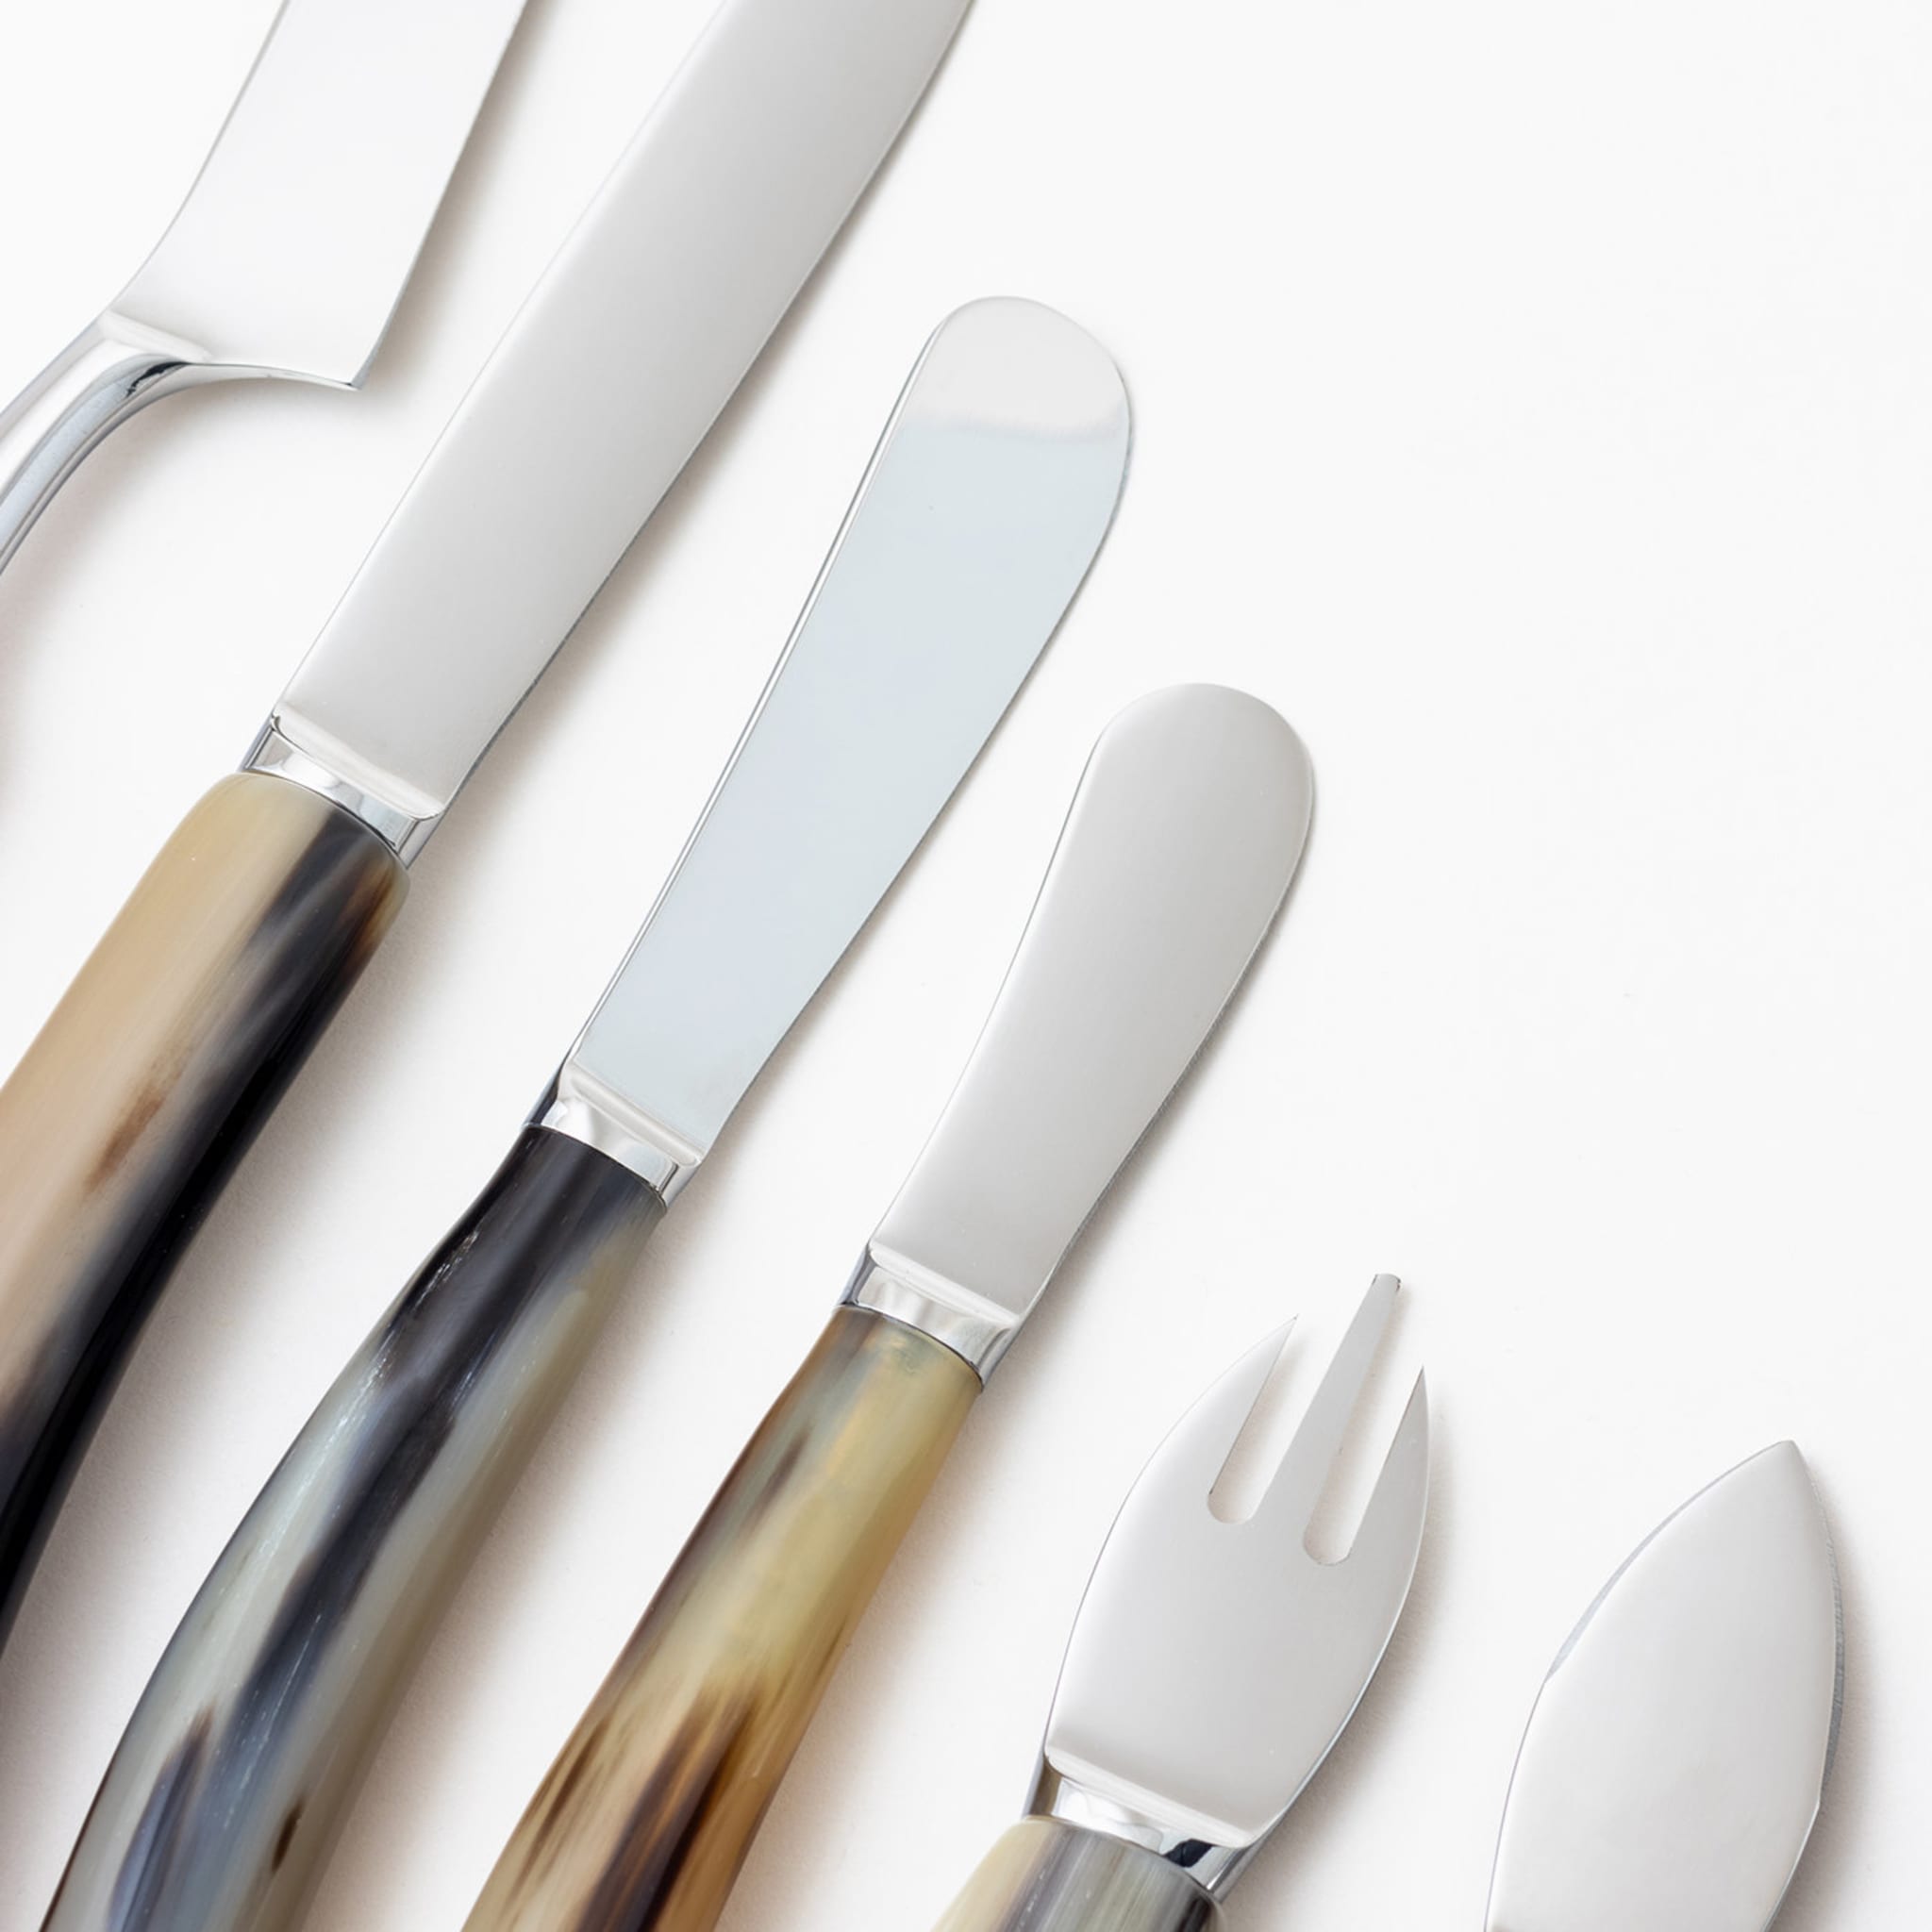 Cheese Cutlery Set in Natural Horn - Alternative view 1